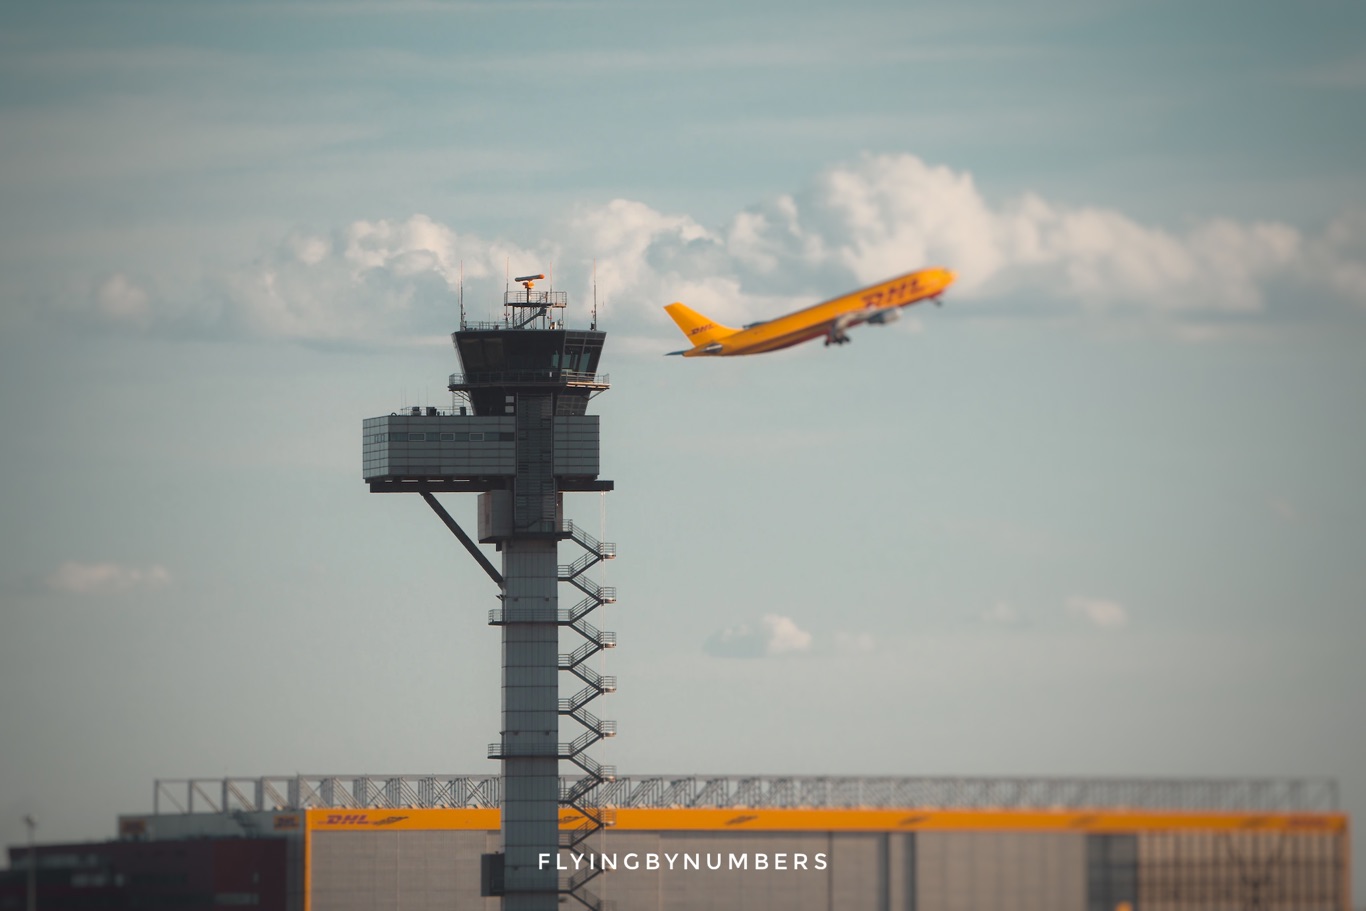 Air traffic control tower controlling departing DHL aircraft